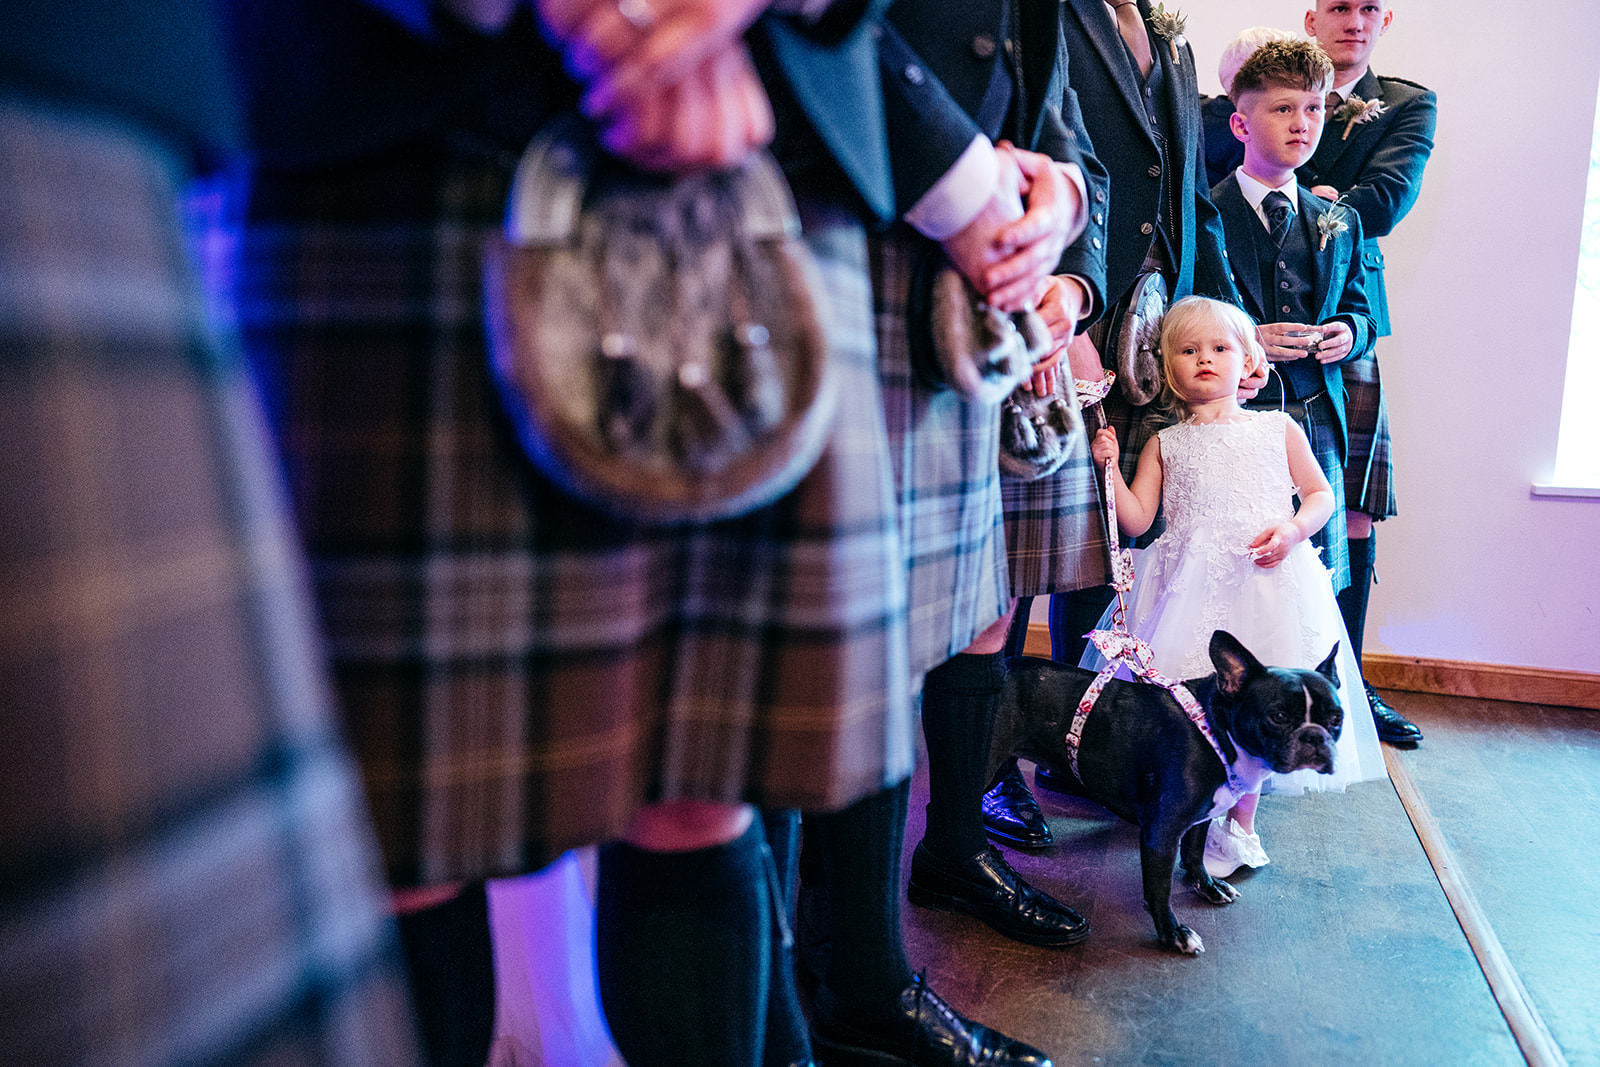 Flower girl and dog look on with groomsmen in kilts during ceremony